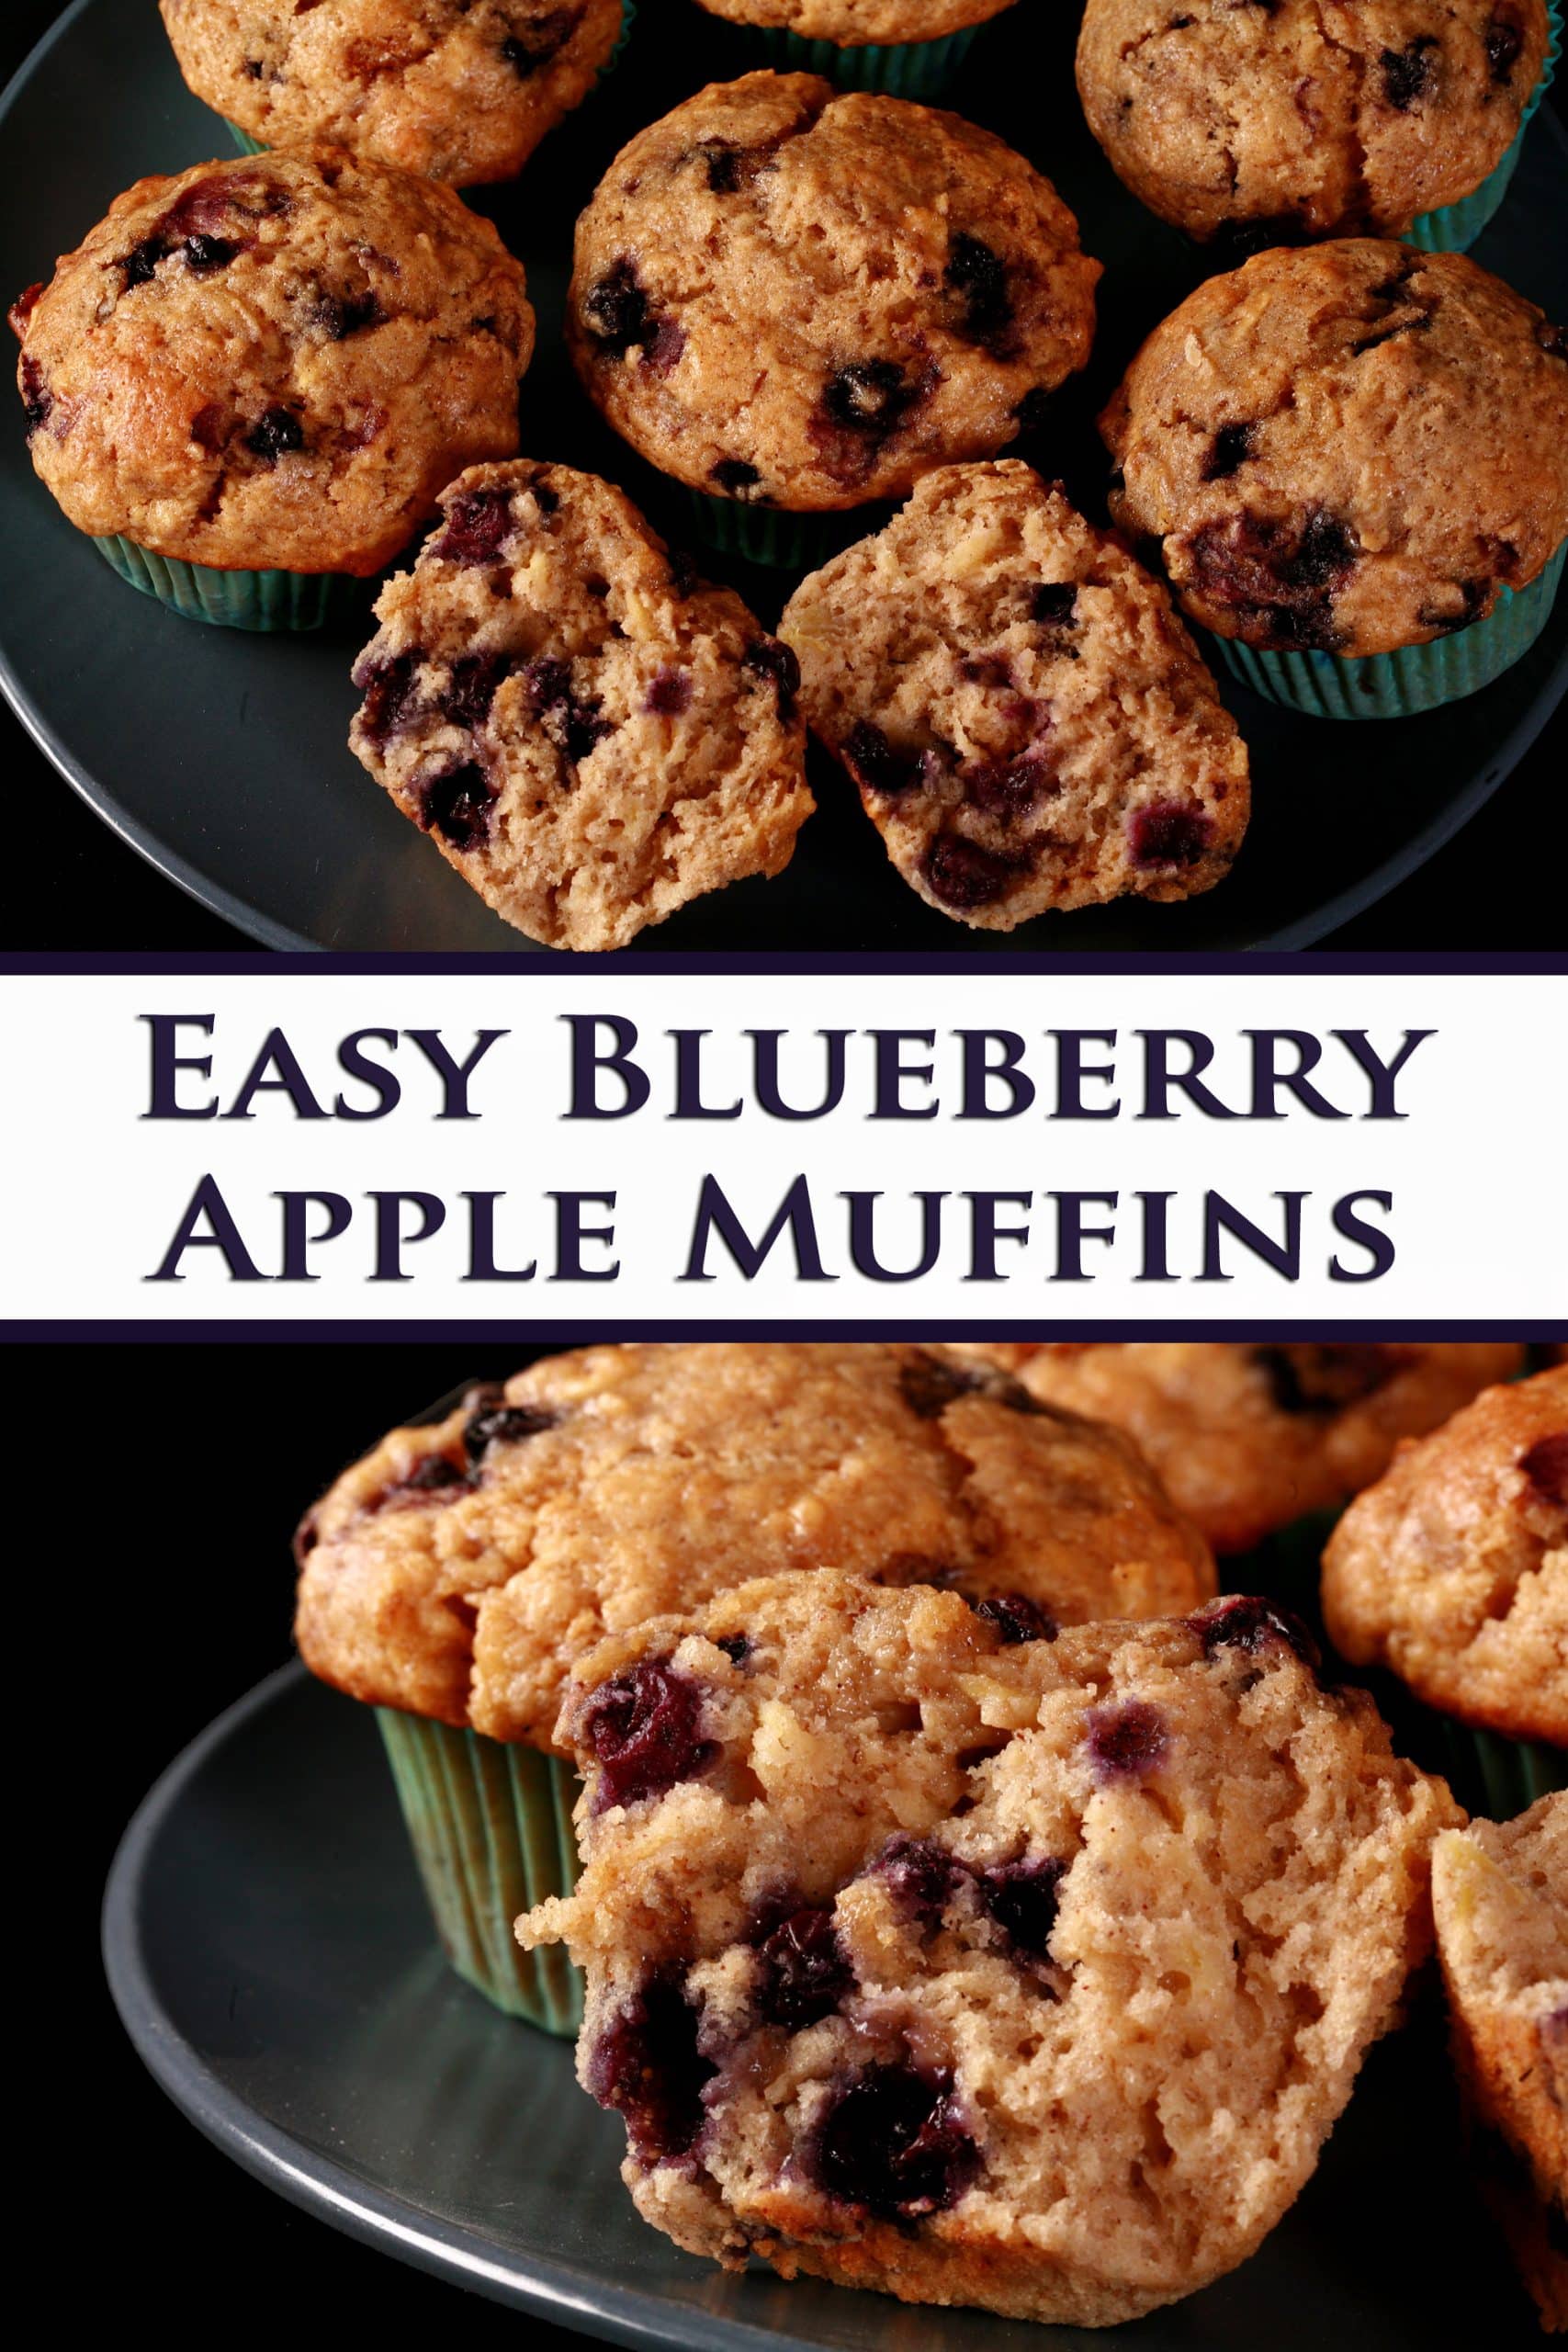 A plate of apple blueberry muffins.  Overlaid text says easy blueberry apple muffins.